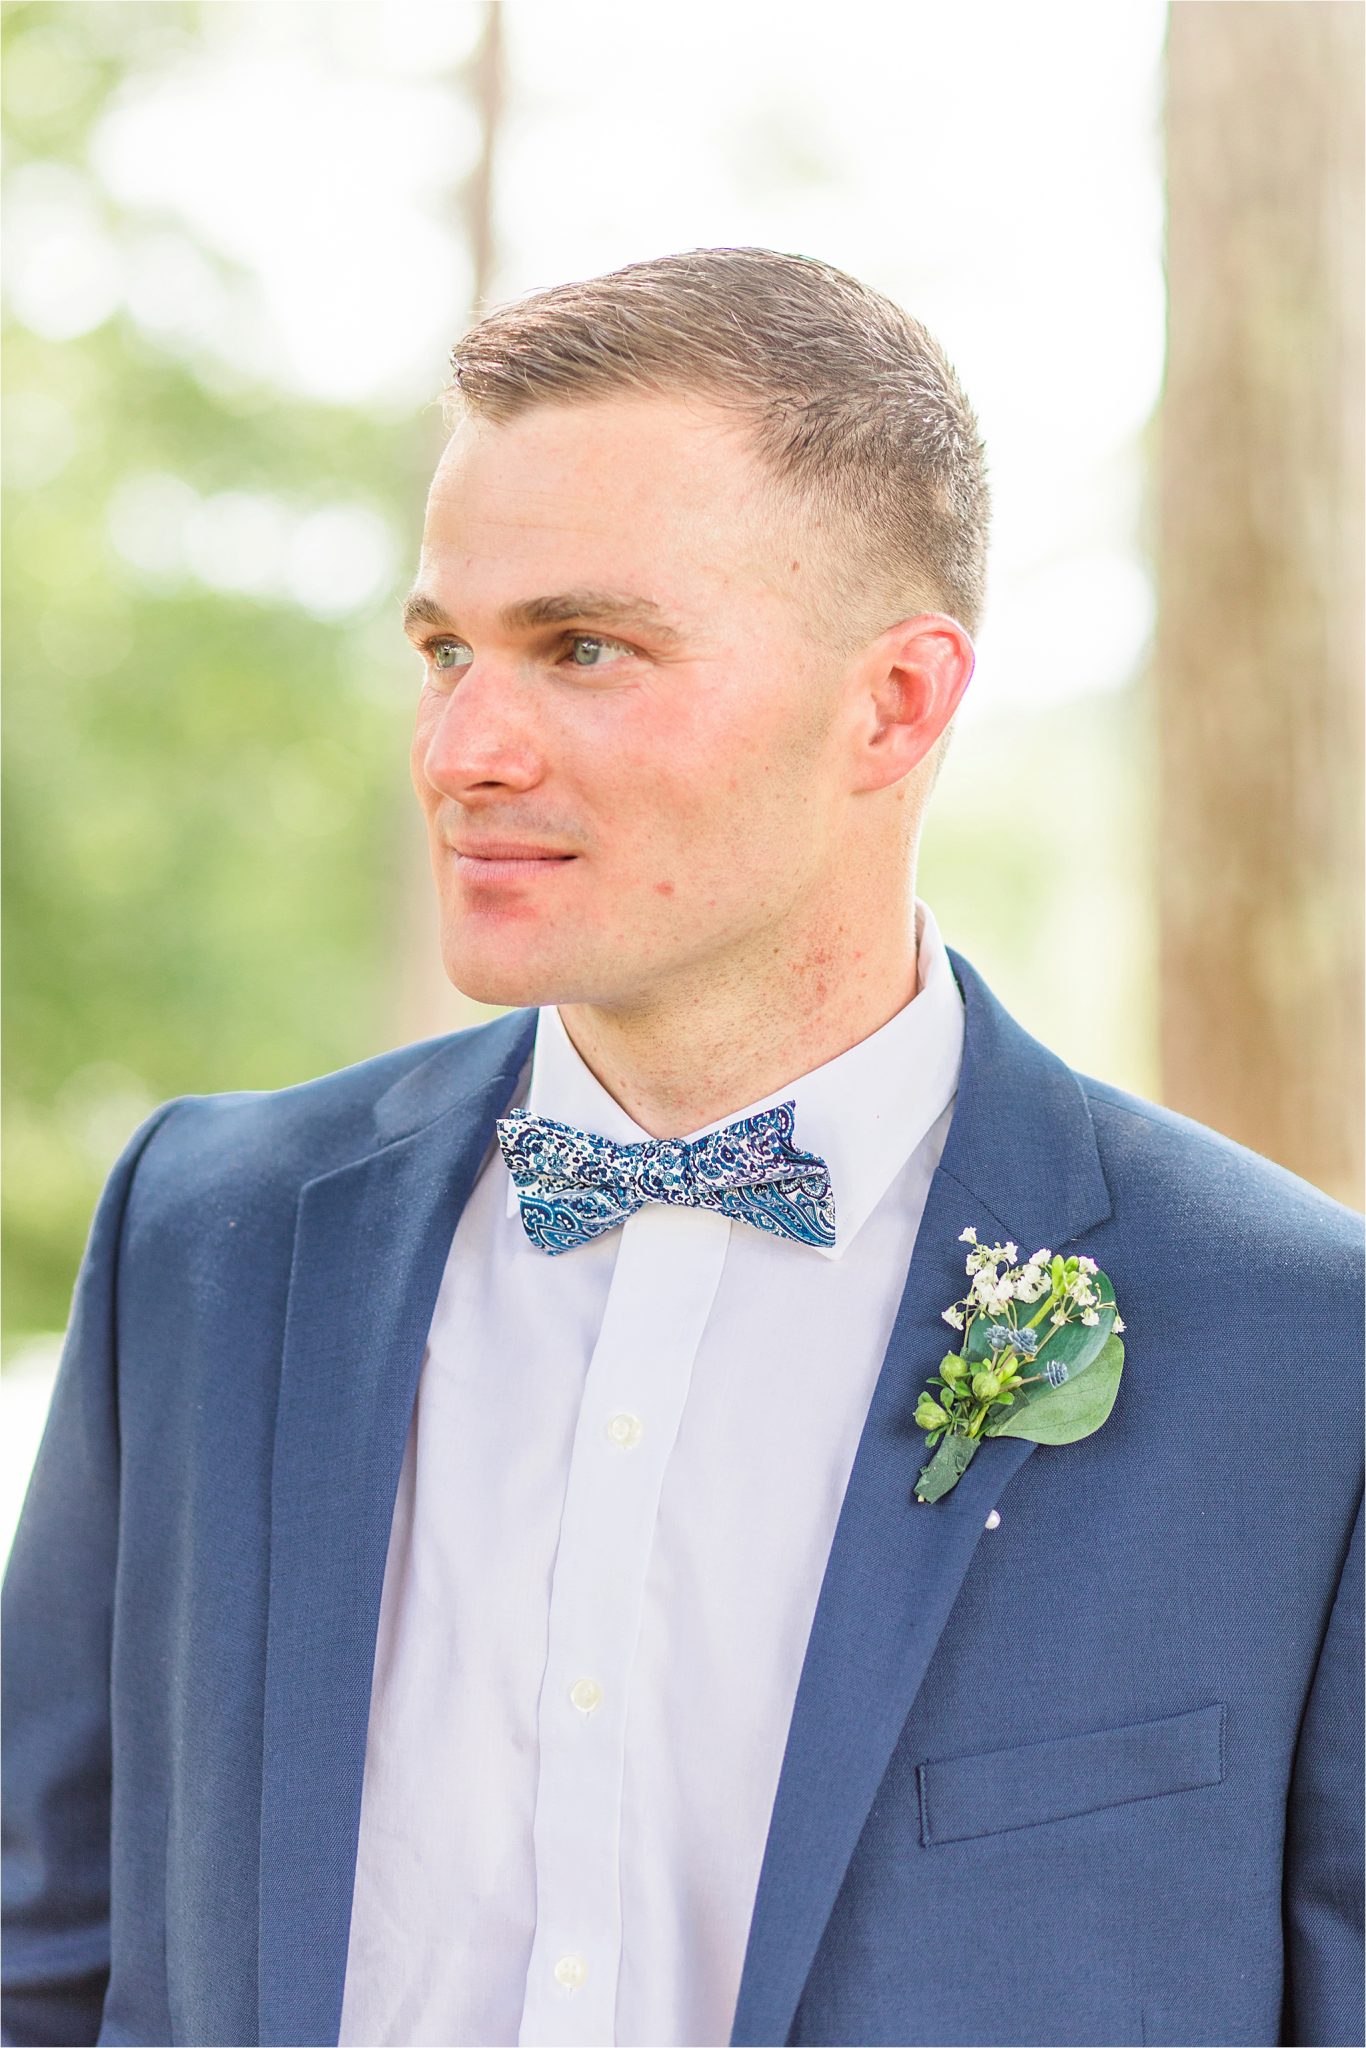 blue-grooms-suit-patterned-bow-tie-clean-cut-fitted-white-dress-shirt-portrait